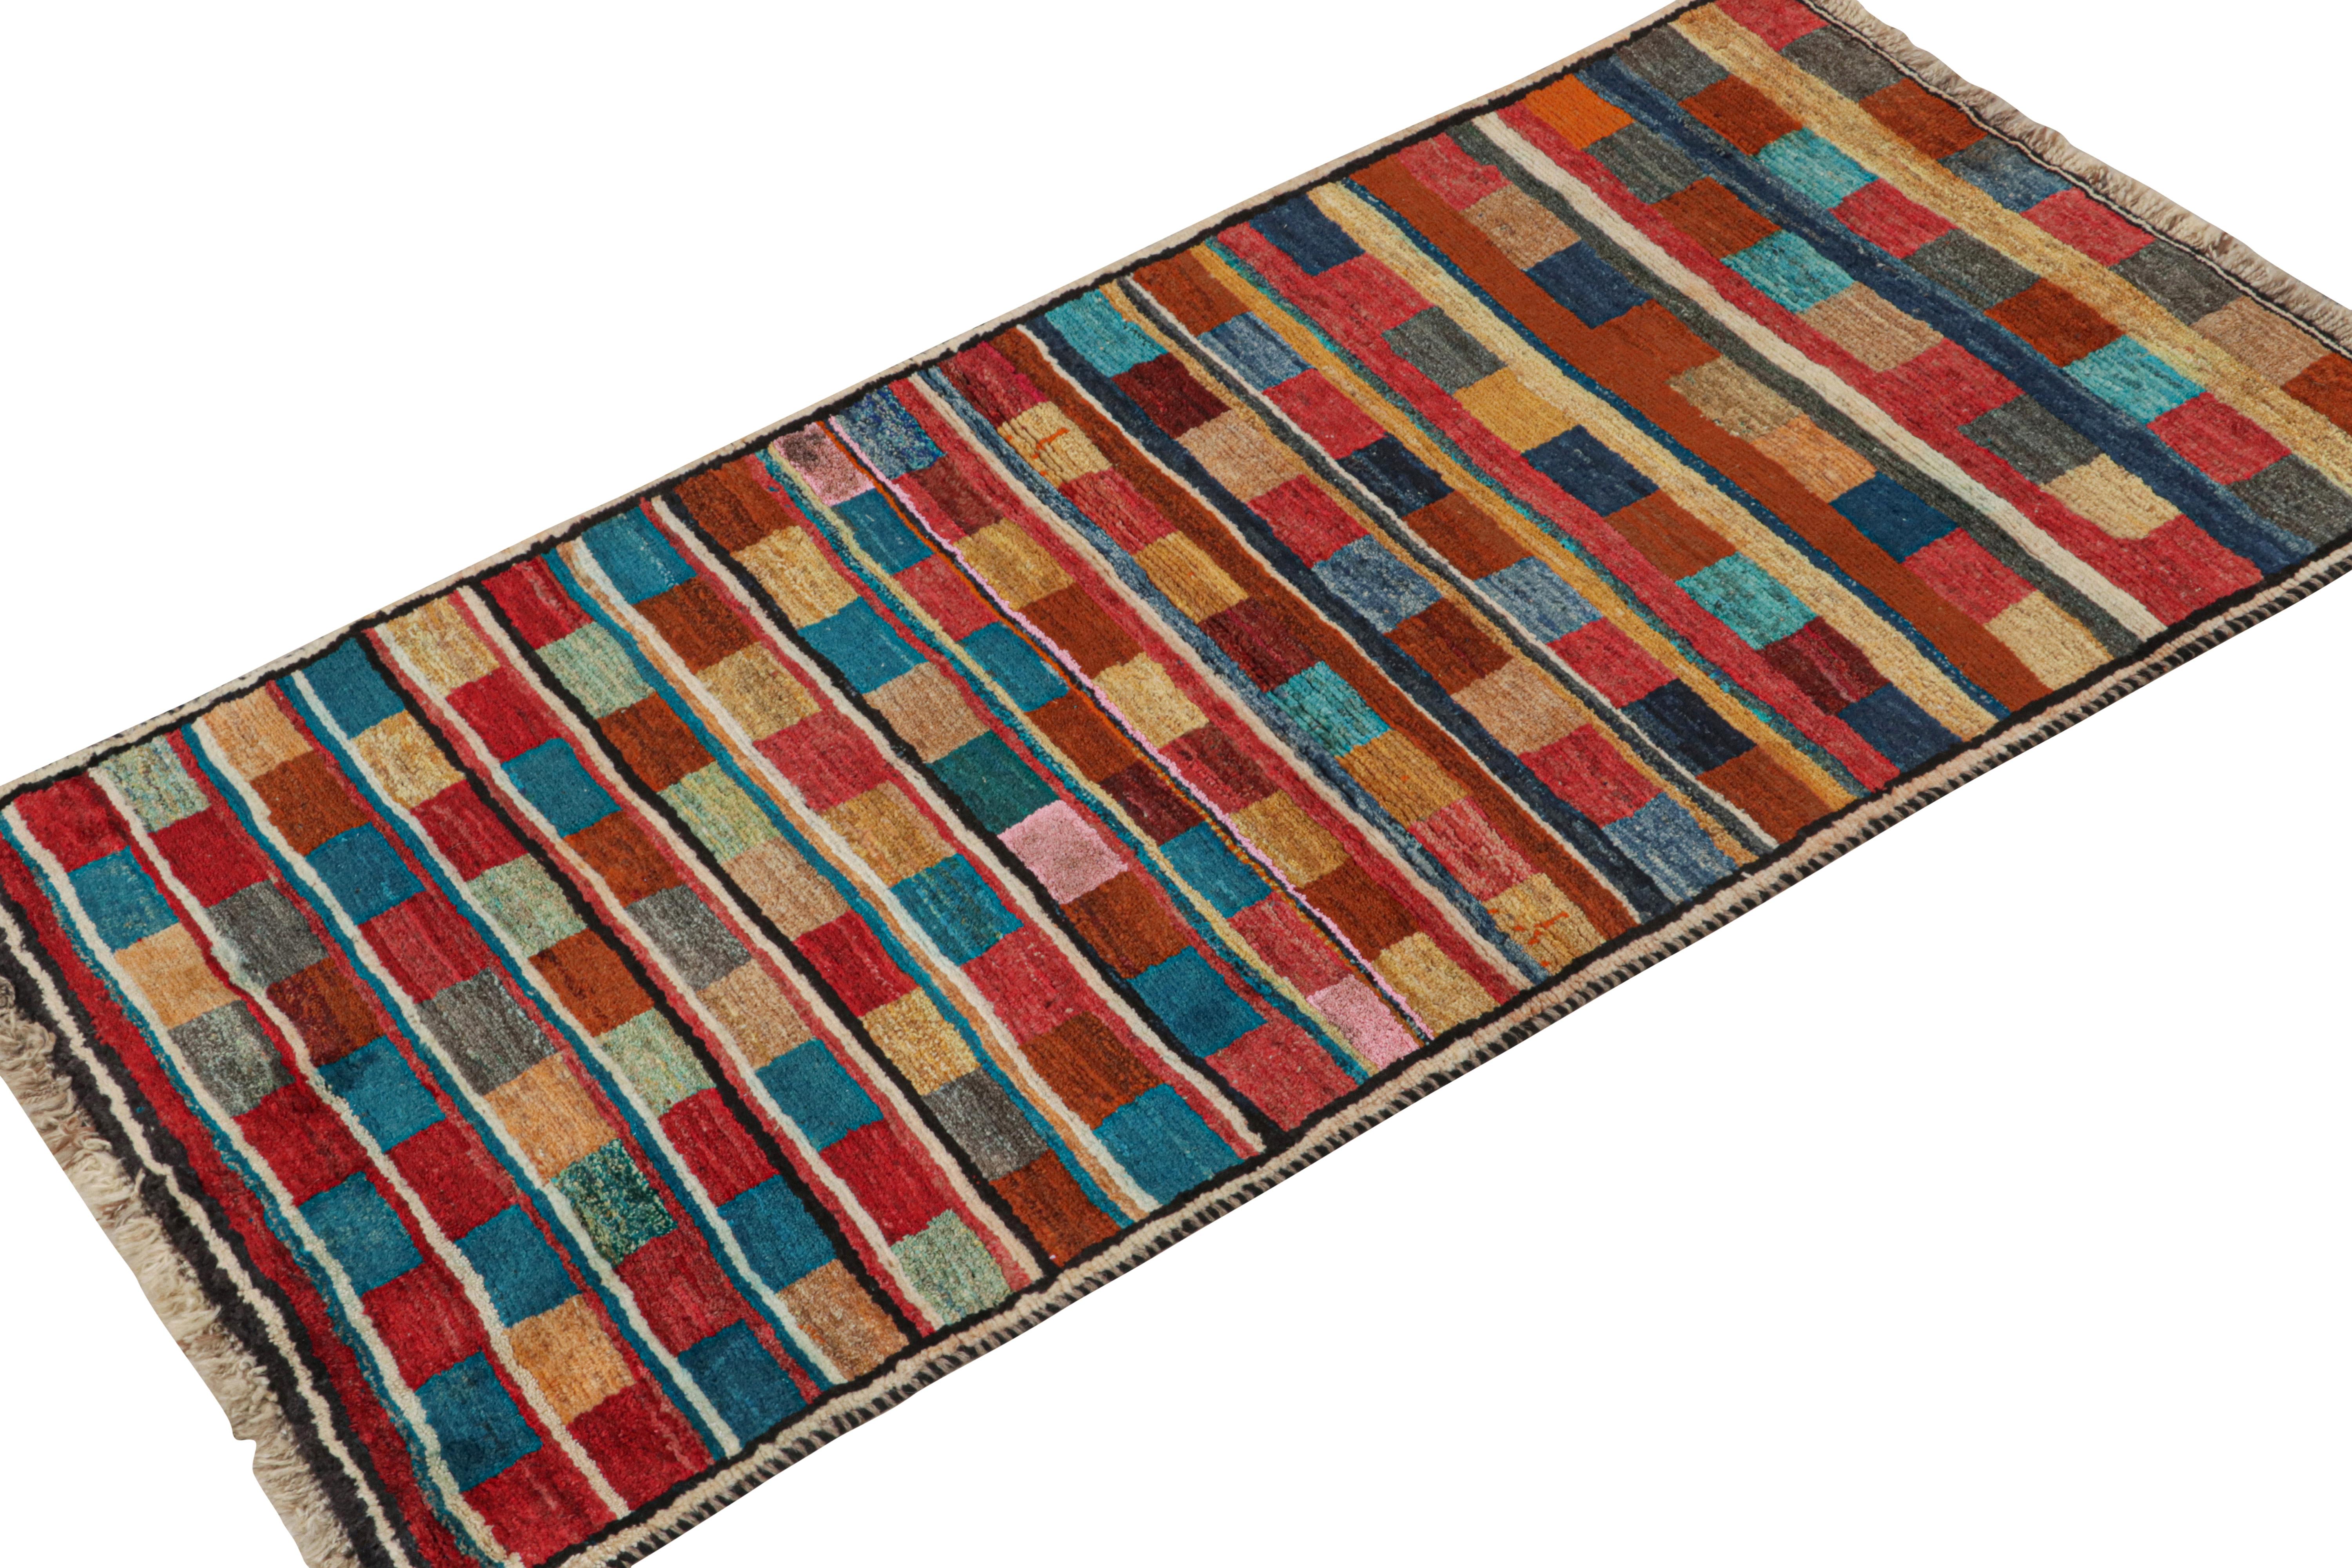 Tribal Vintage Qashqai Persian Gabbeh runner in Polychromatic Patterns by Rug & Kilim For Sale